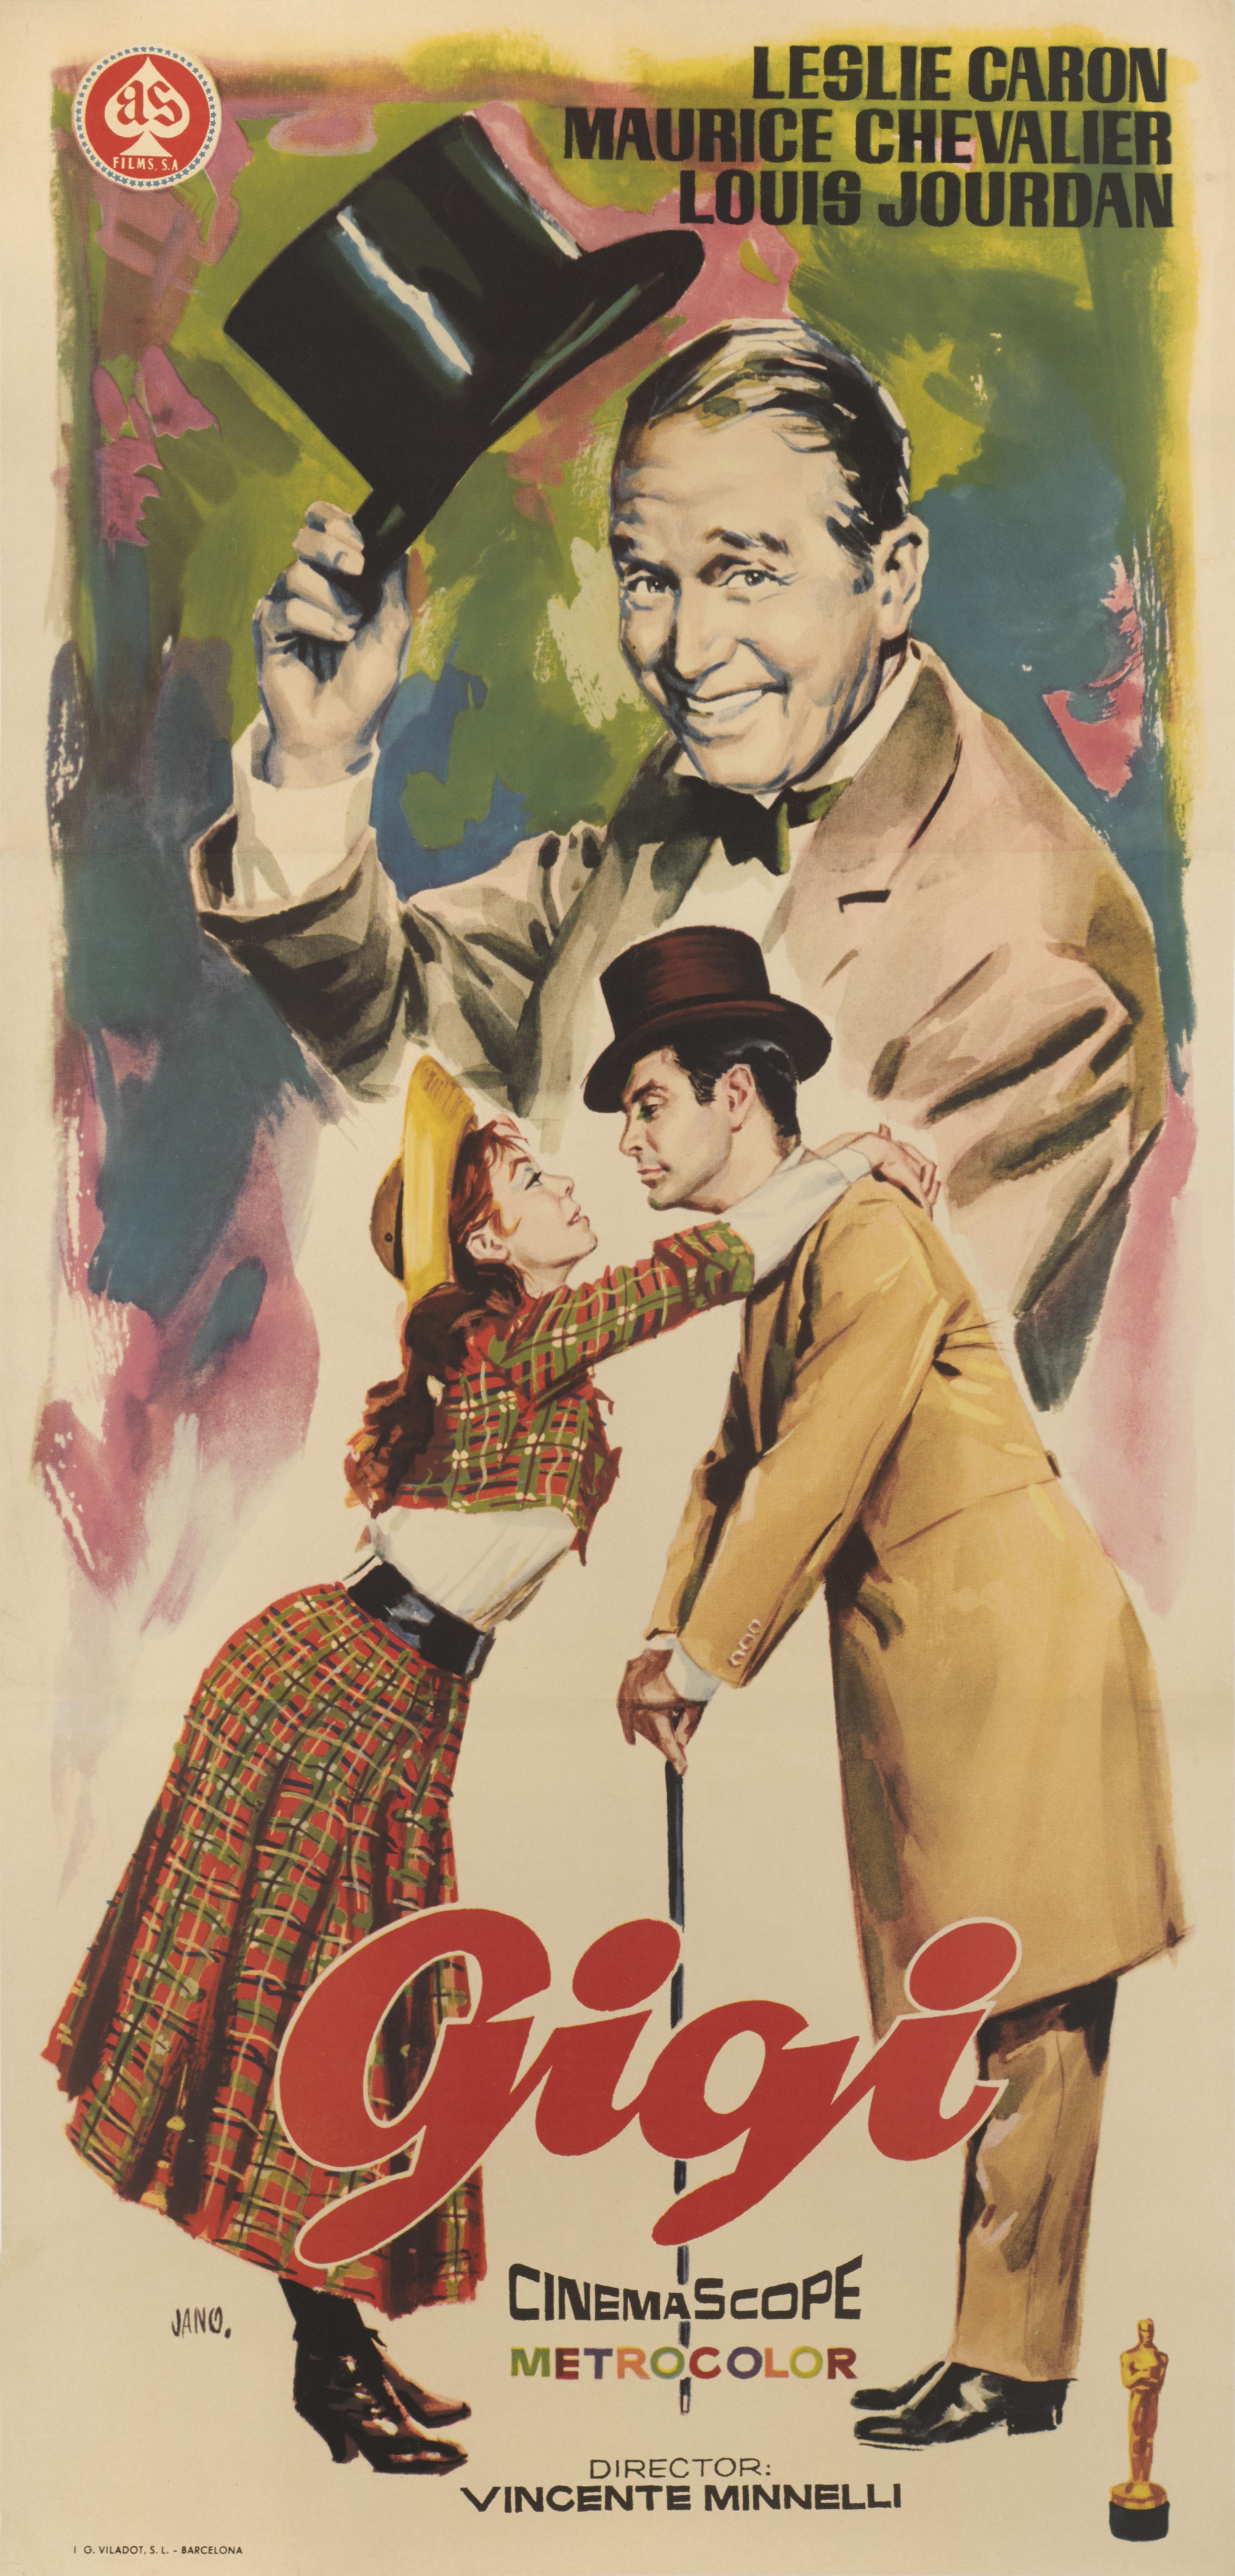 Original Spanish film poster for the American romantic musical romantic comedy directed by Vincente Minnelli and starring Leslie Caron, Maurice Chevalier, Louis Jourdan. The artwork on this poster is by the Spanish artist Jano. 
This poster is